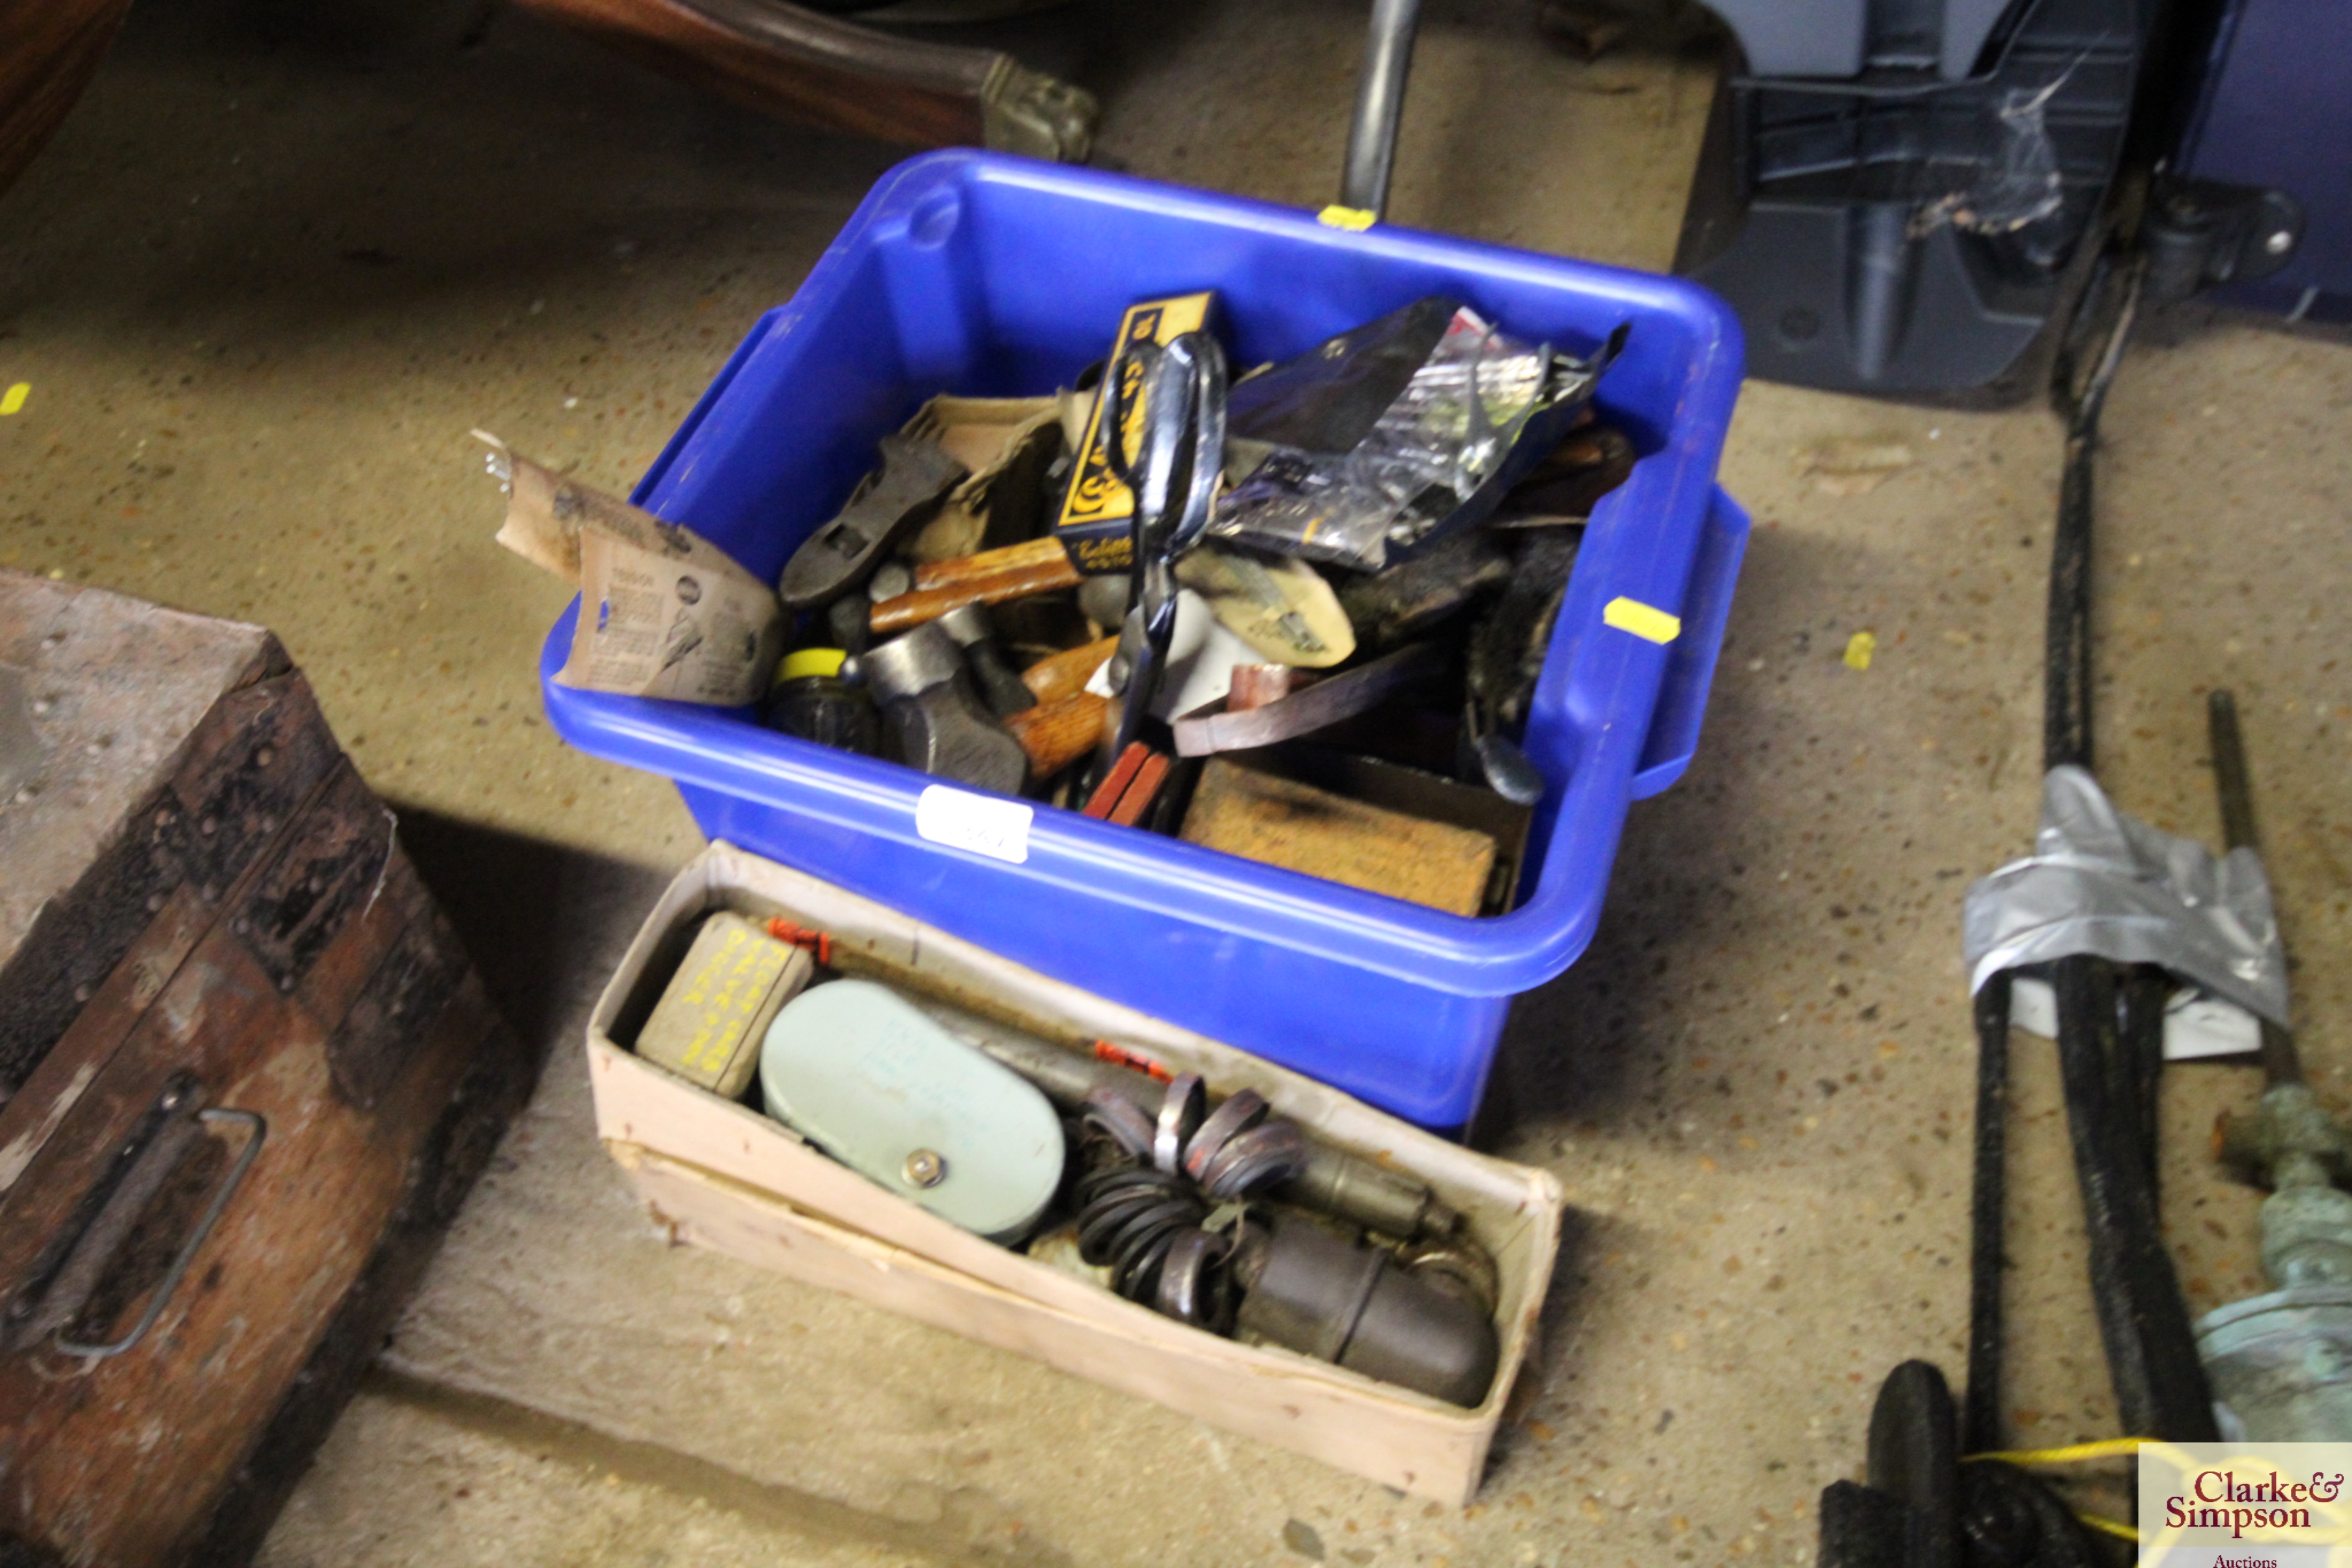 A plastic crate containing various hand tools to i